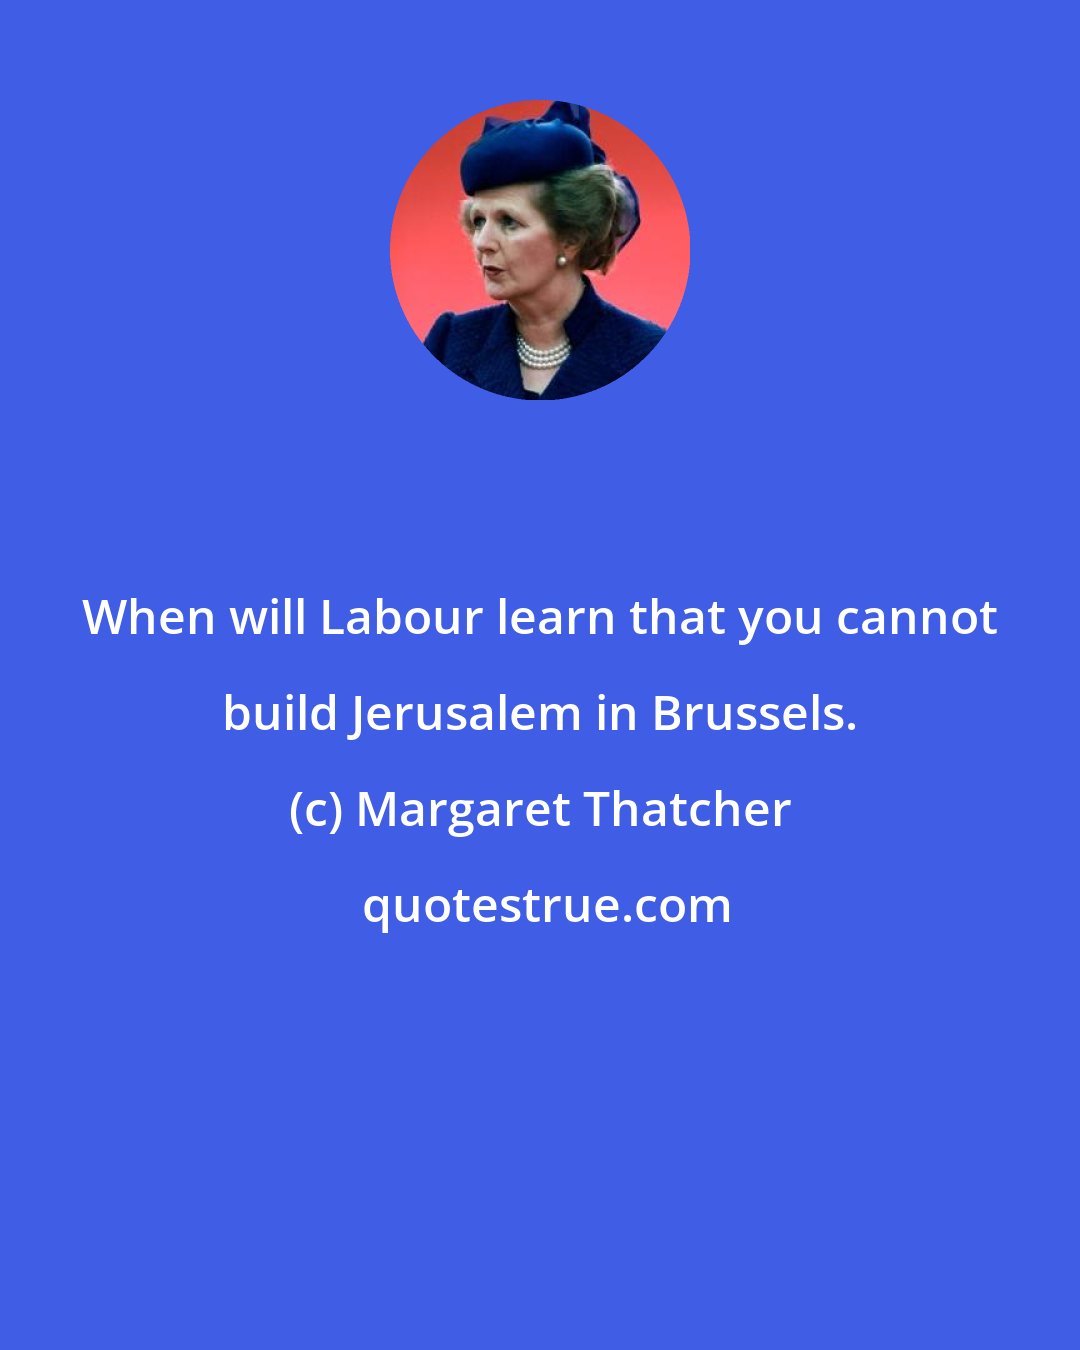 Margaret Thatcher: When will Labour learn that you cannot build Jerusalem in Brussels.